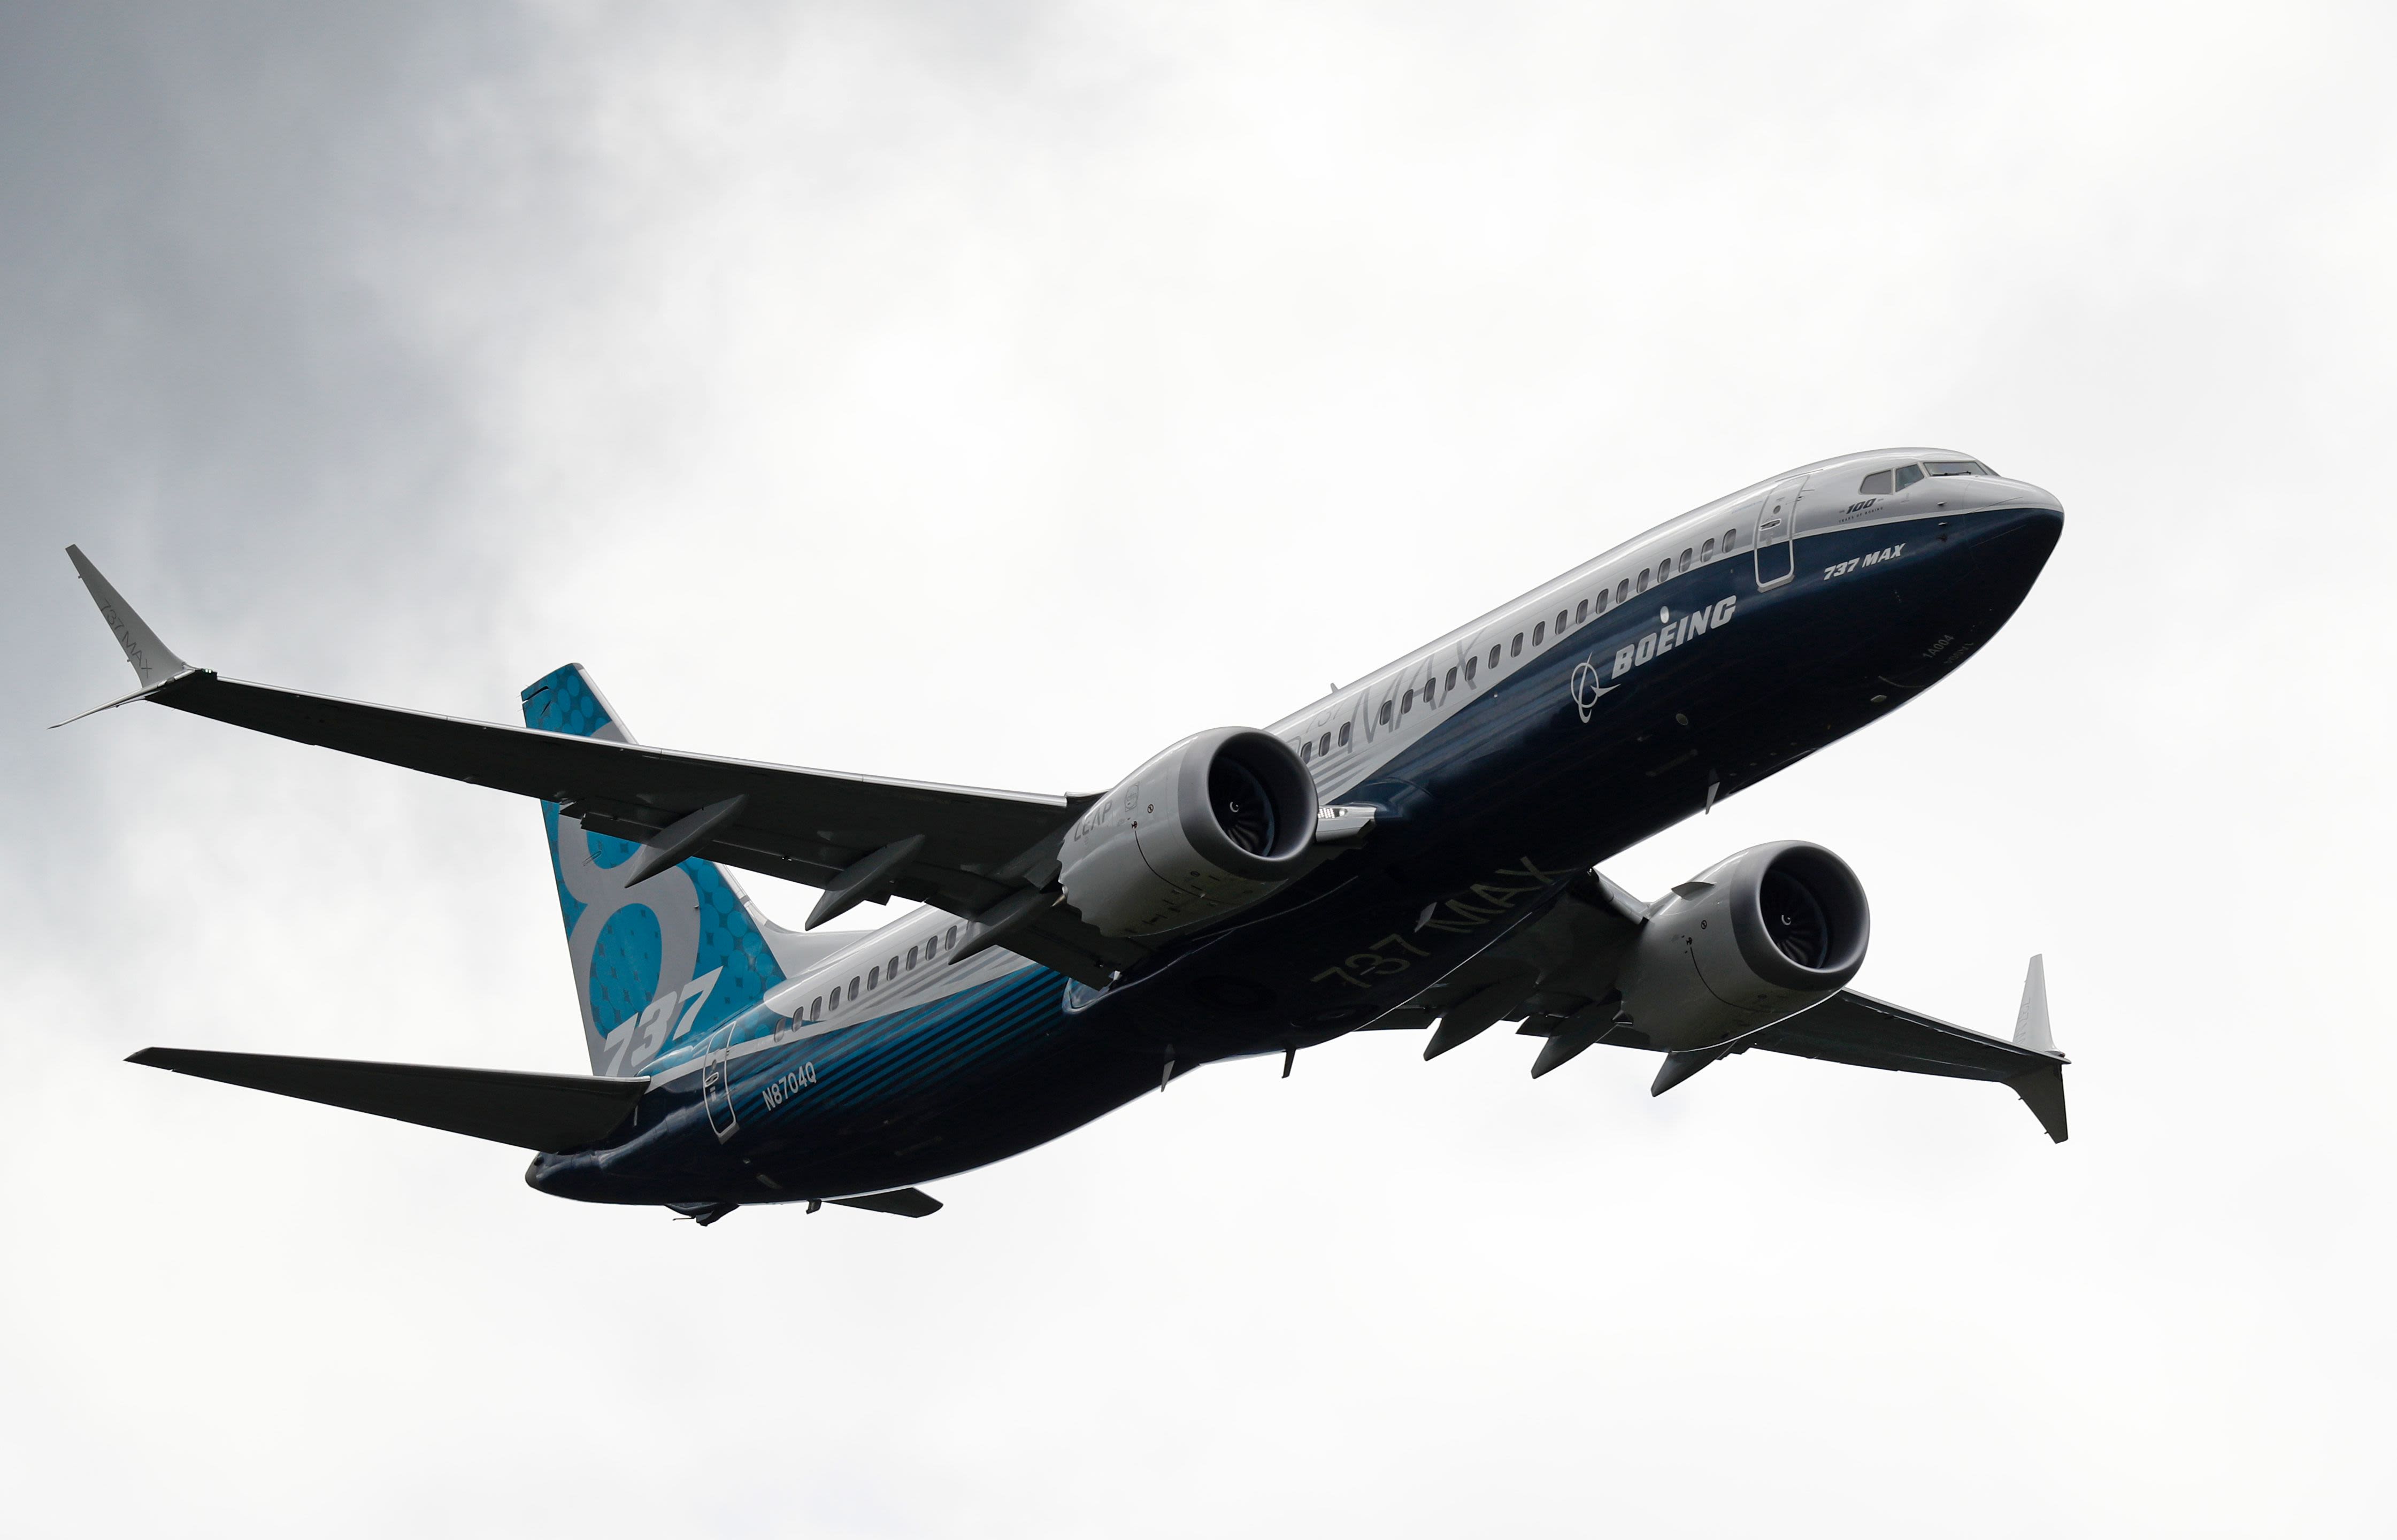 New flaw discovered on Boeing 737 Max, sources say | CNN Politics